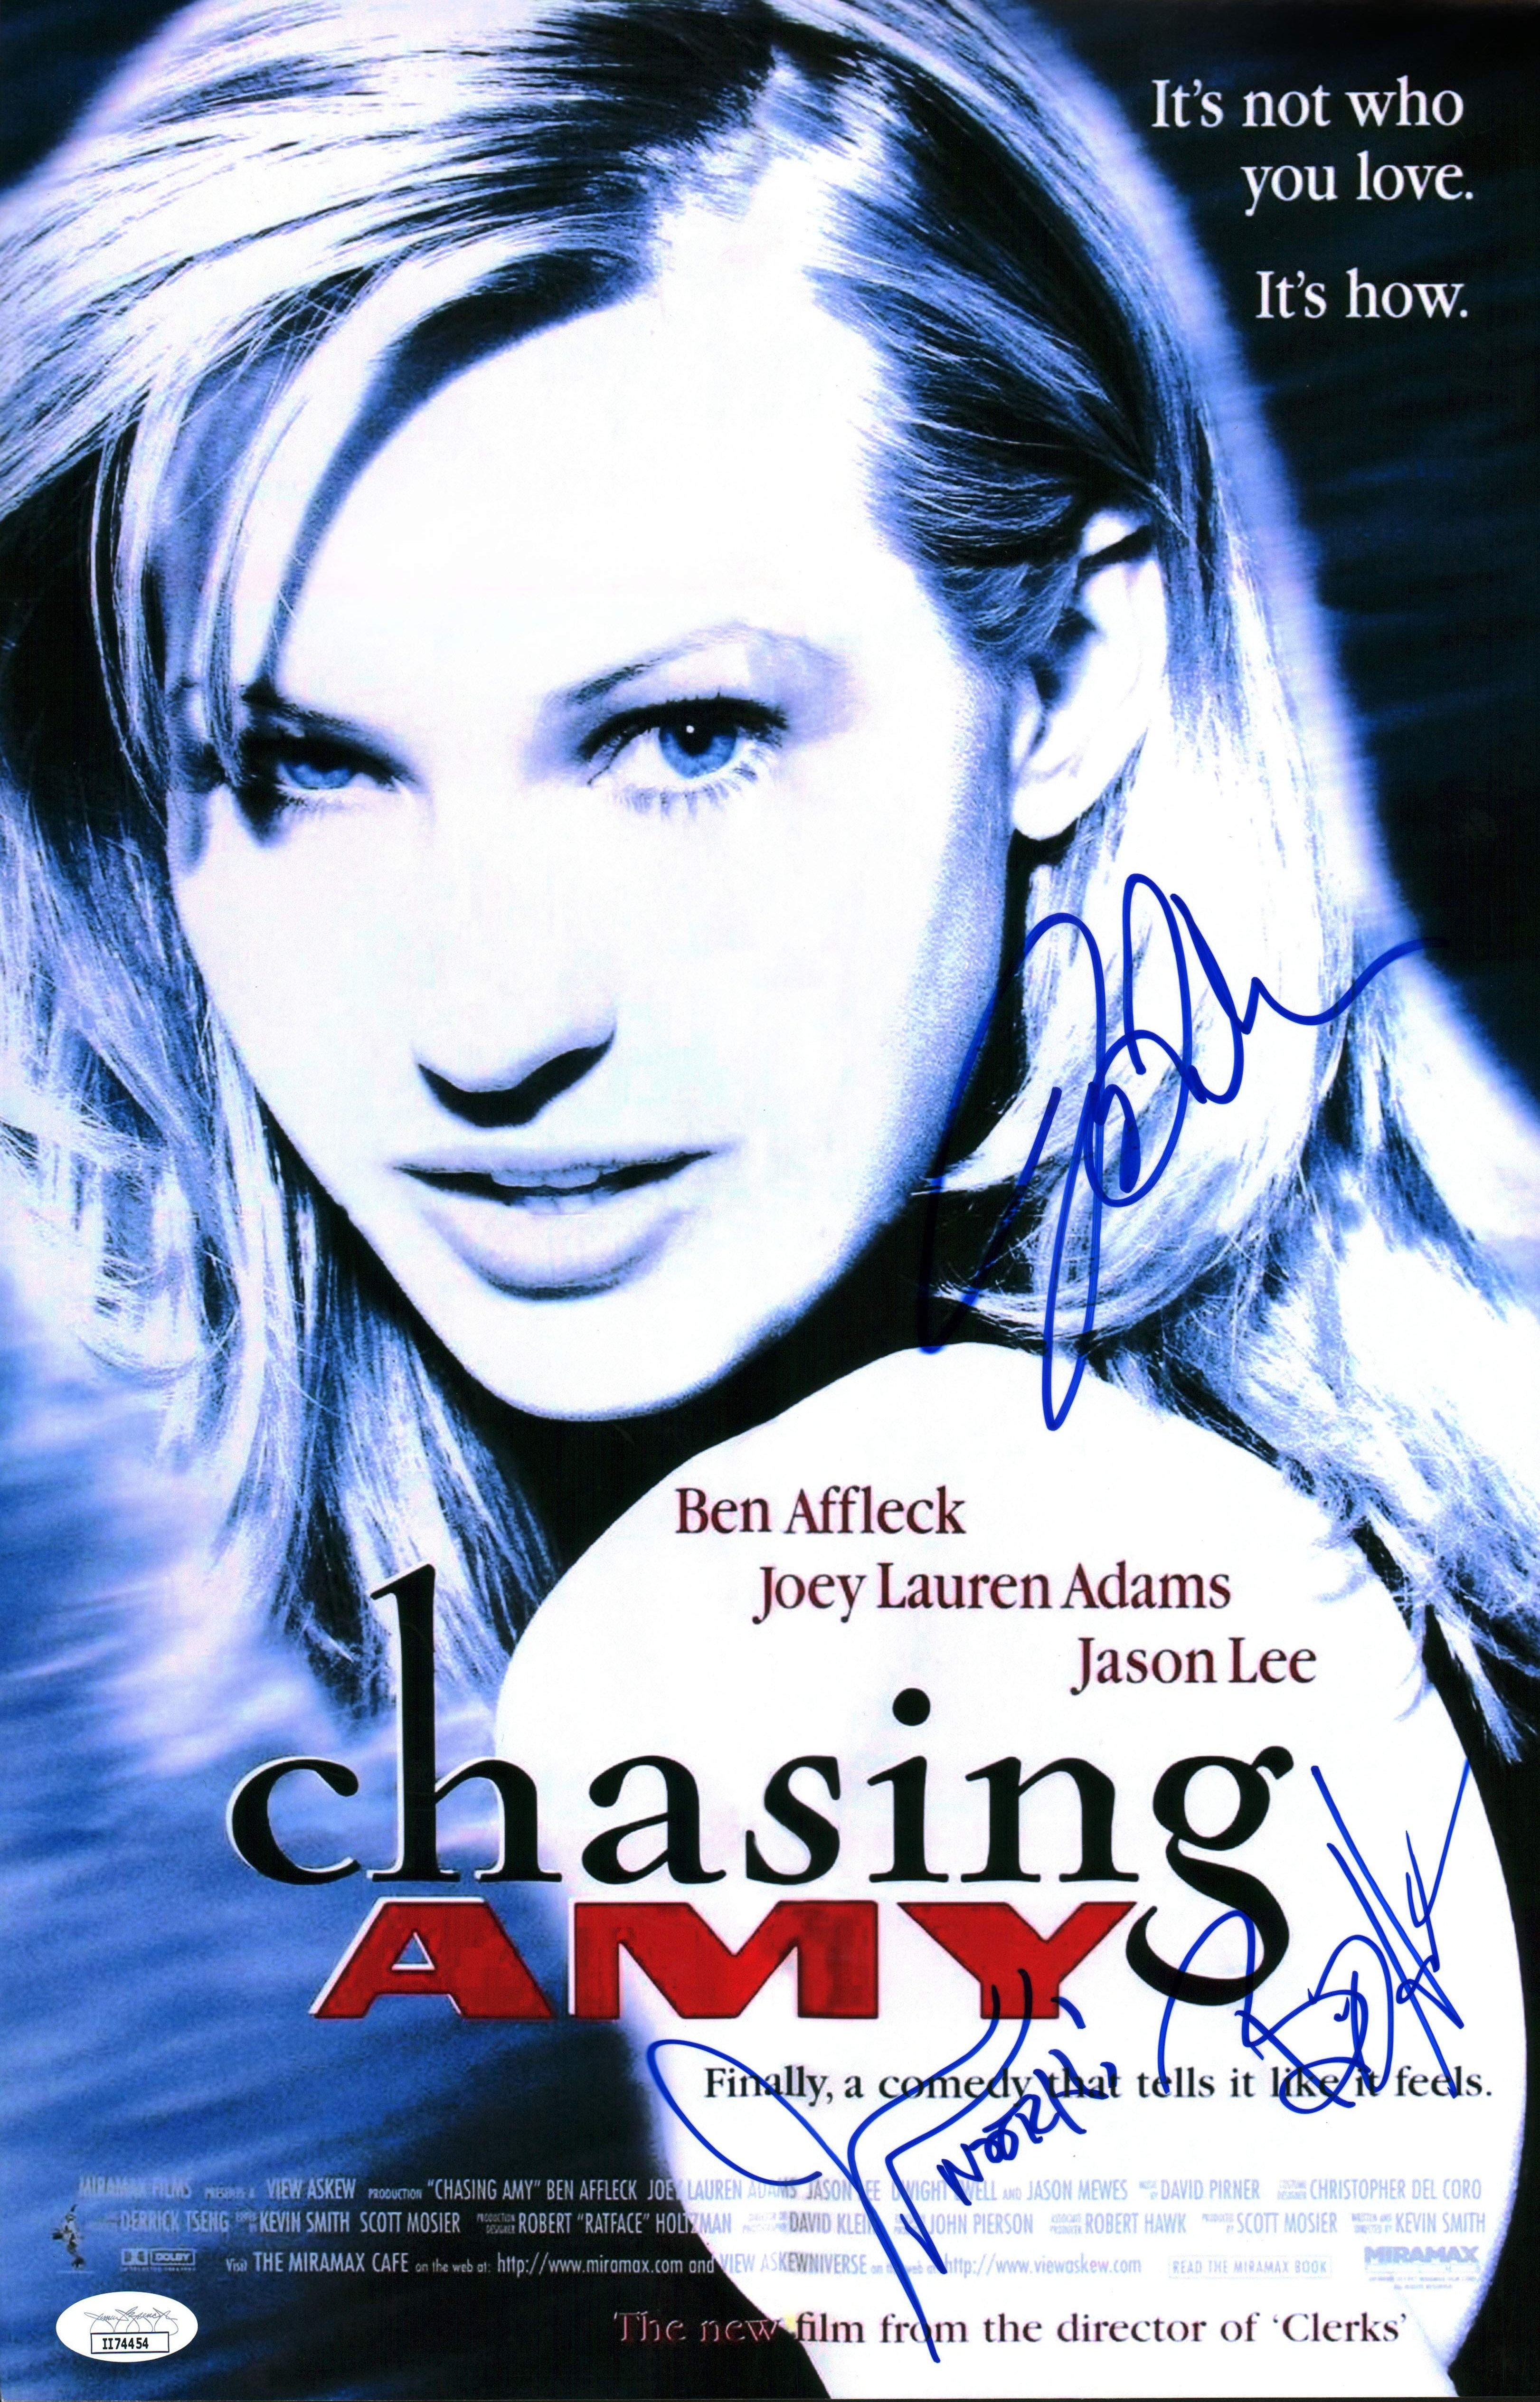 Chasing Amy 11x17 Poster Signed Autograph Mewes O'Halloran Adams JSA Certified COA GalaxyCon